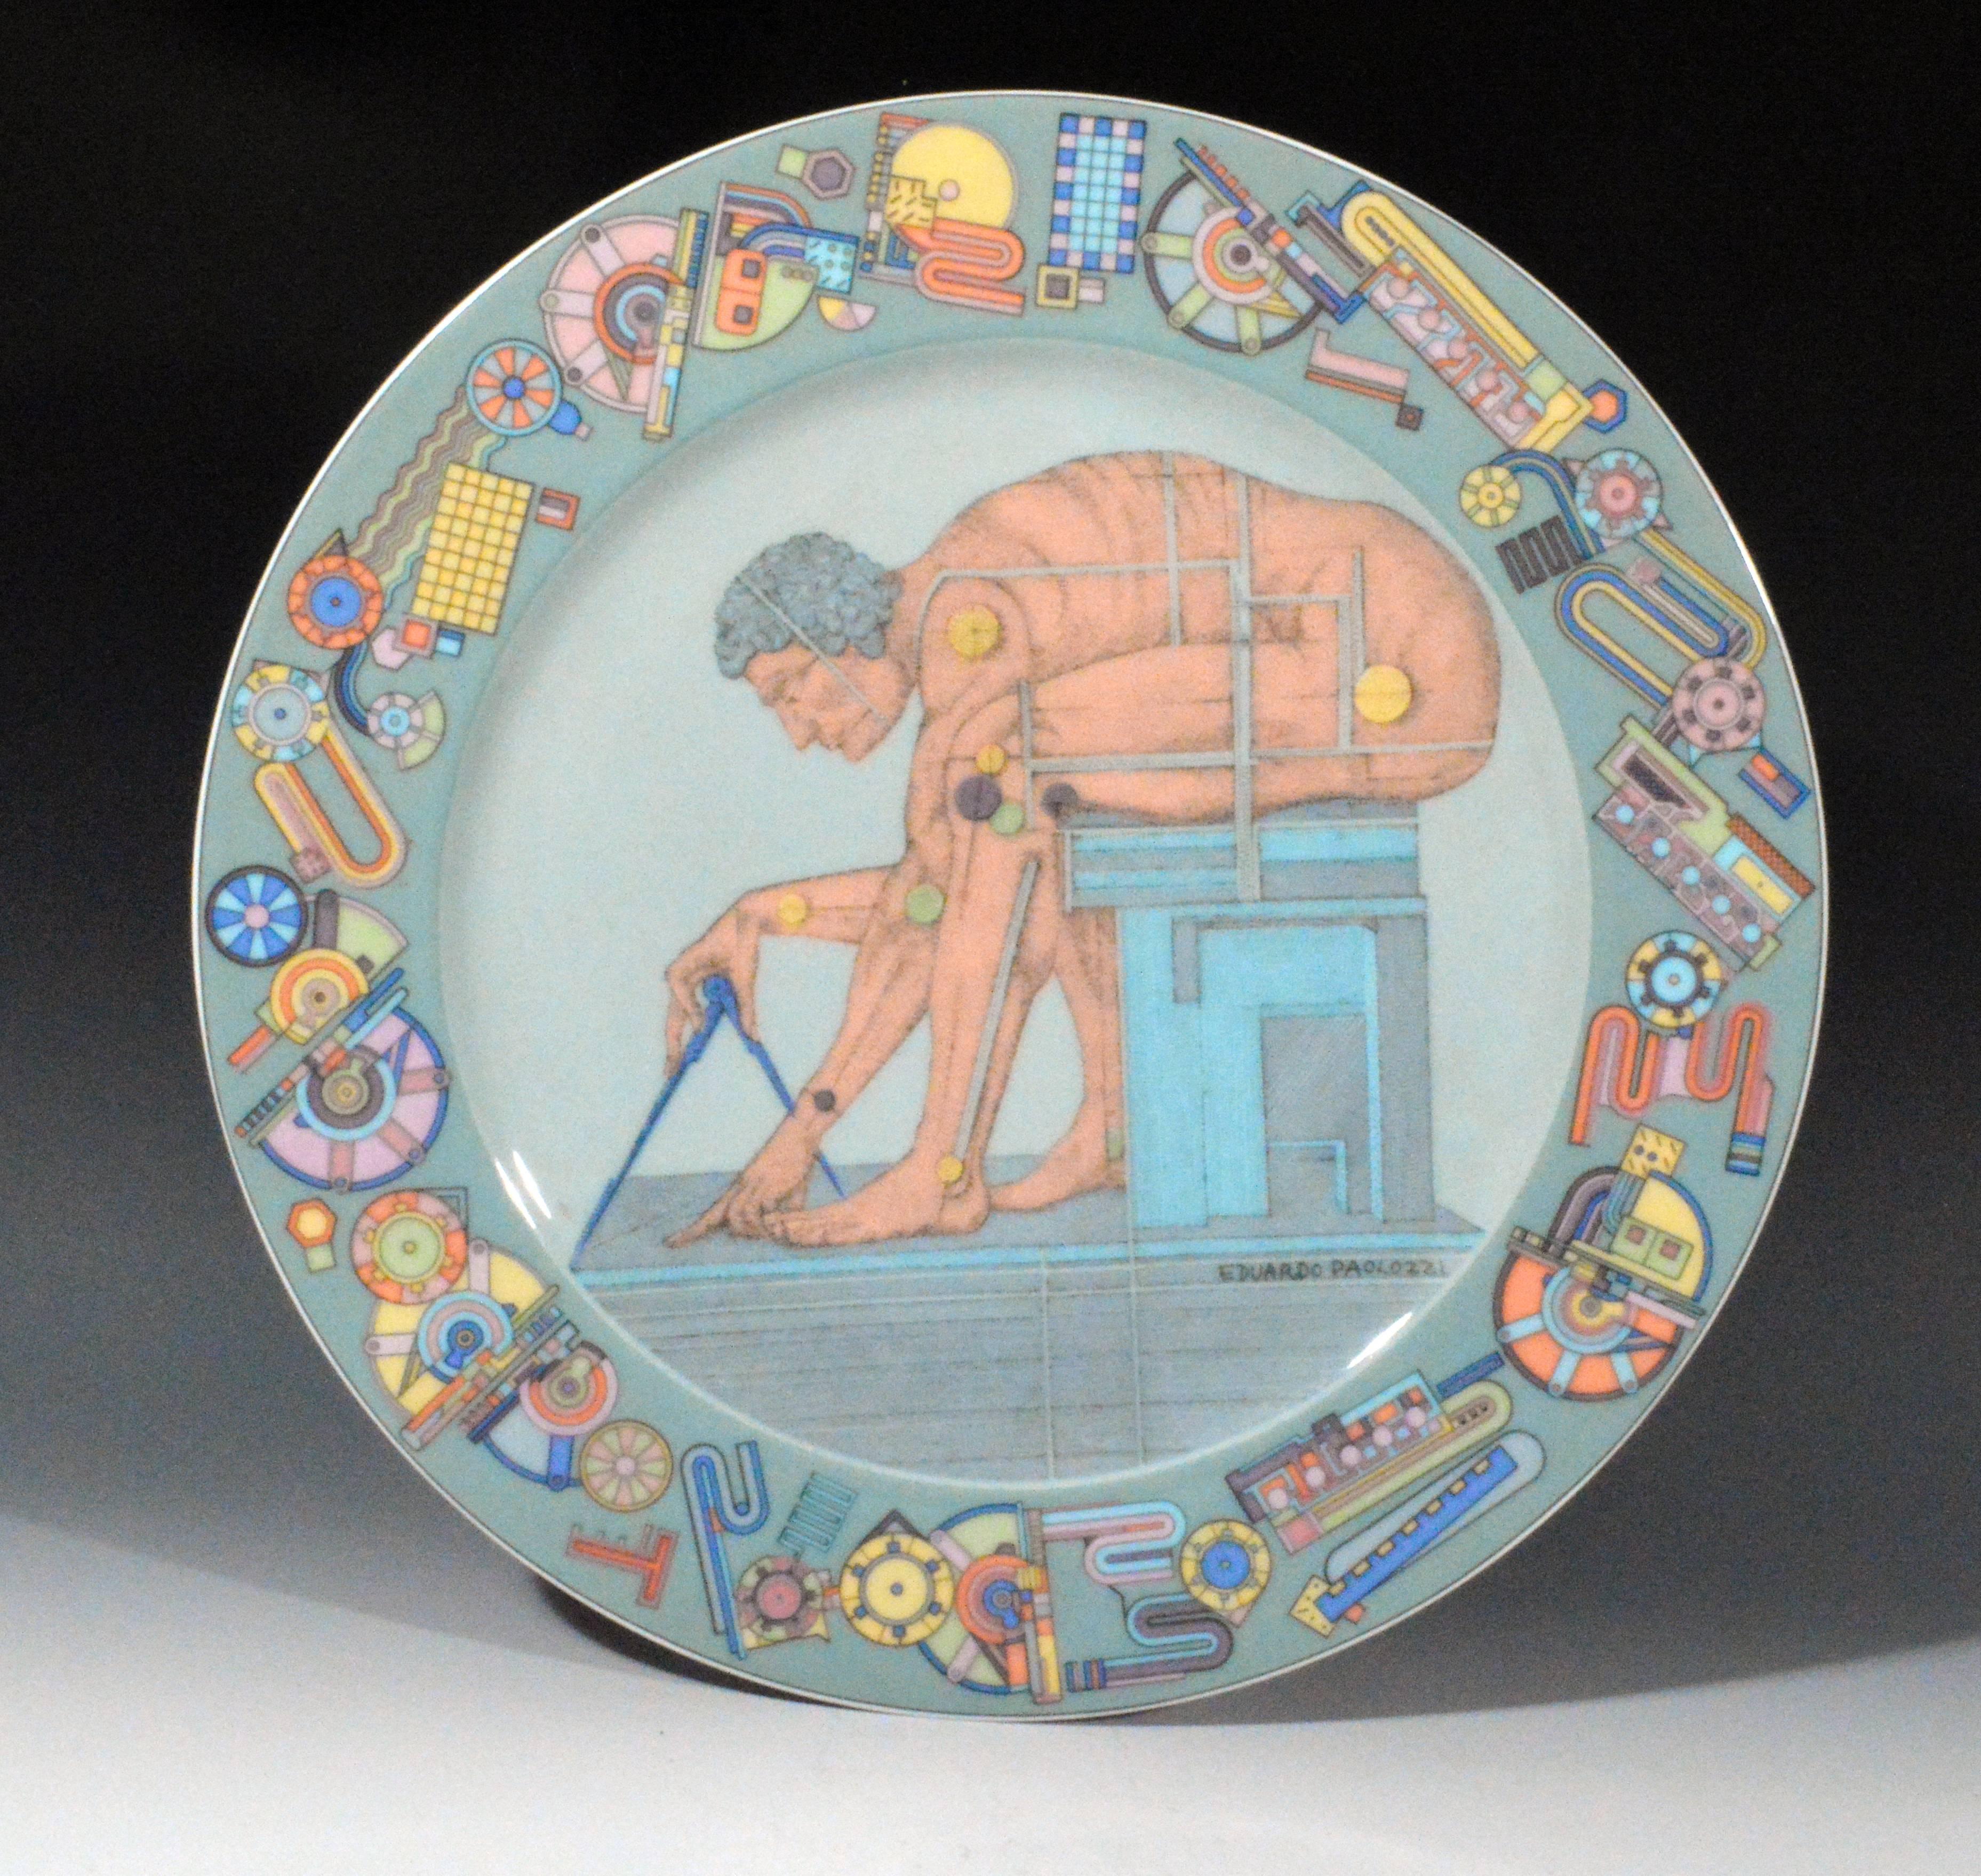 Eduardo Paolozzi's dish made by Rosenthal depicts 